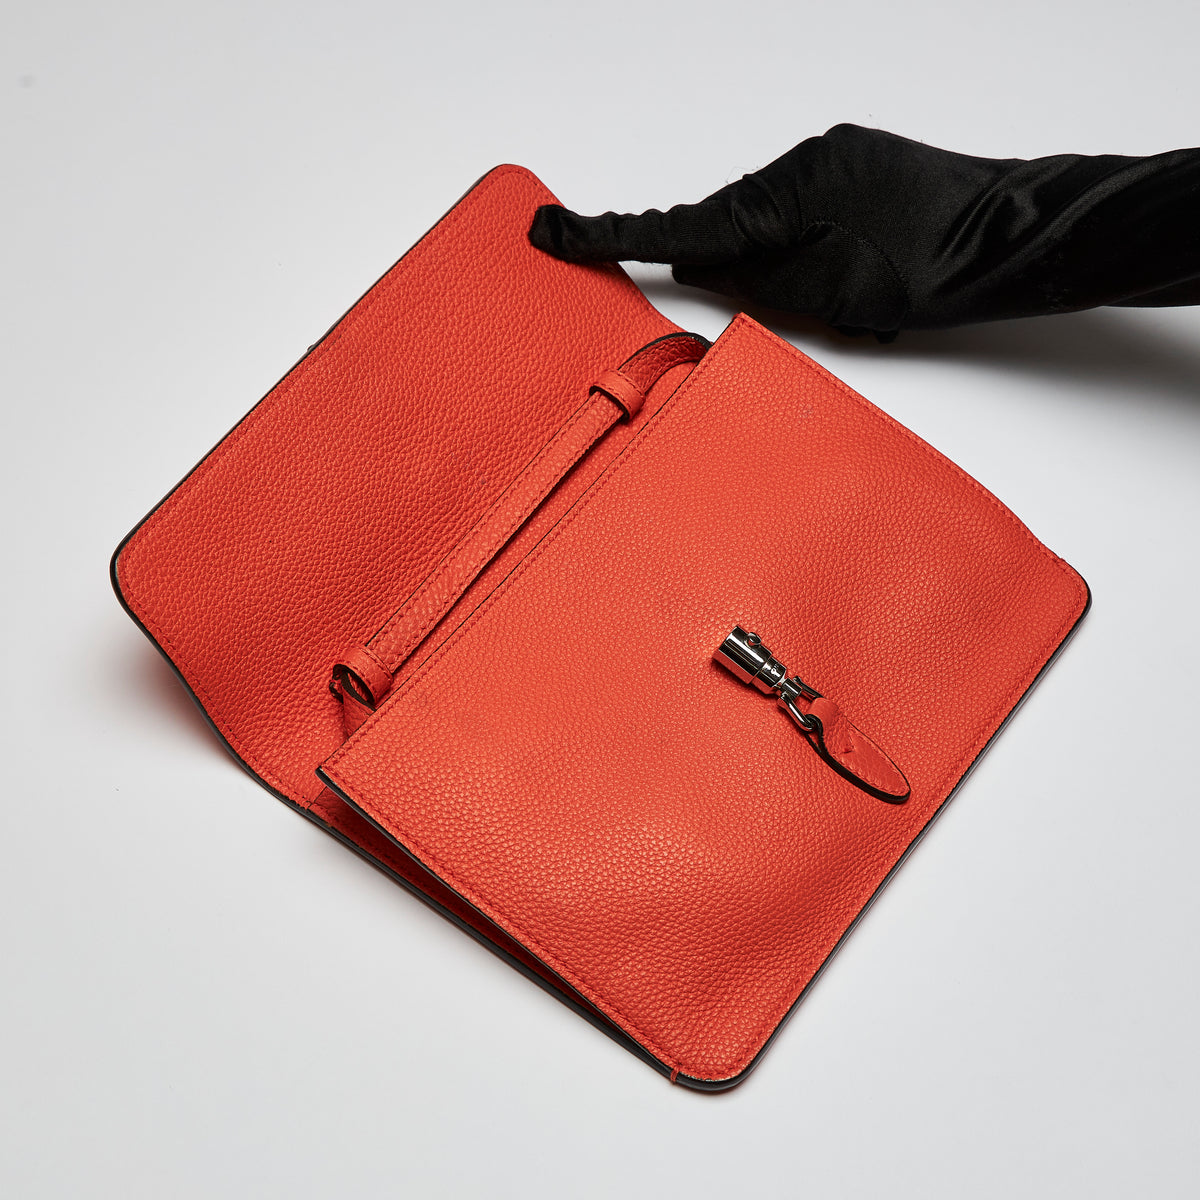 Excellent Pre-Loved Orange Pebbled Soft Leather Thin Crossbody Pouch with Removable Shoulder Strap and Silver Tone Hardware. (flap)